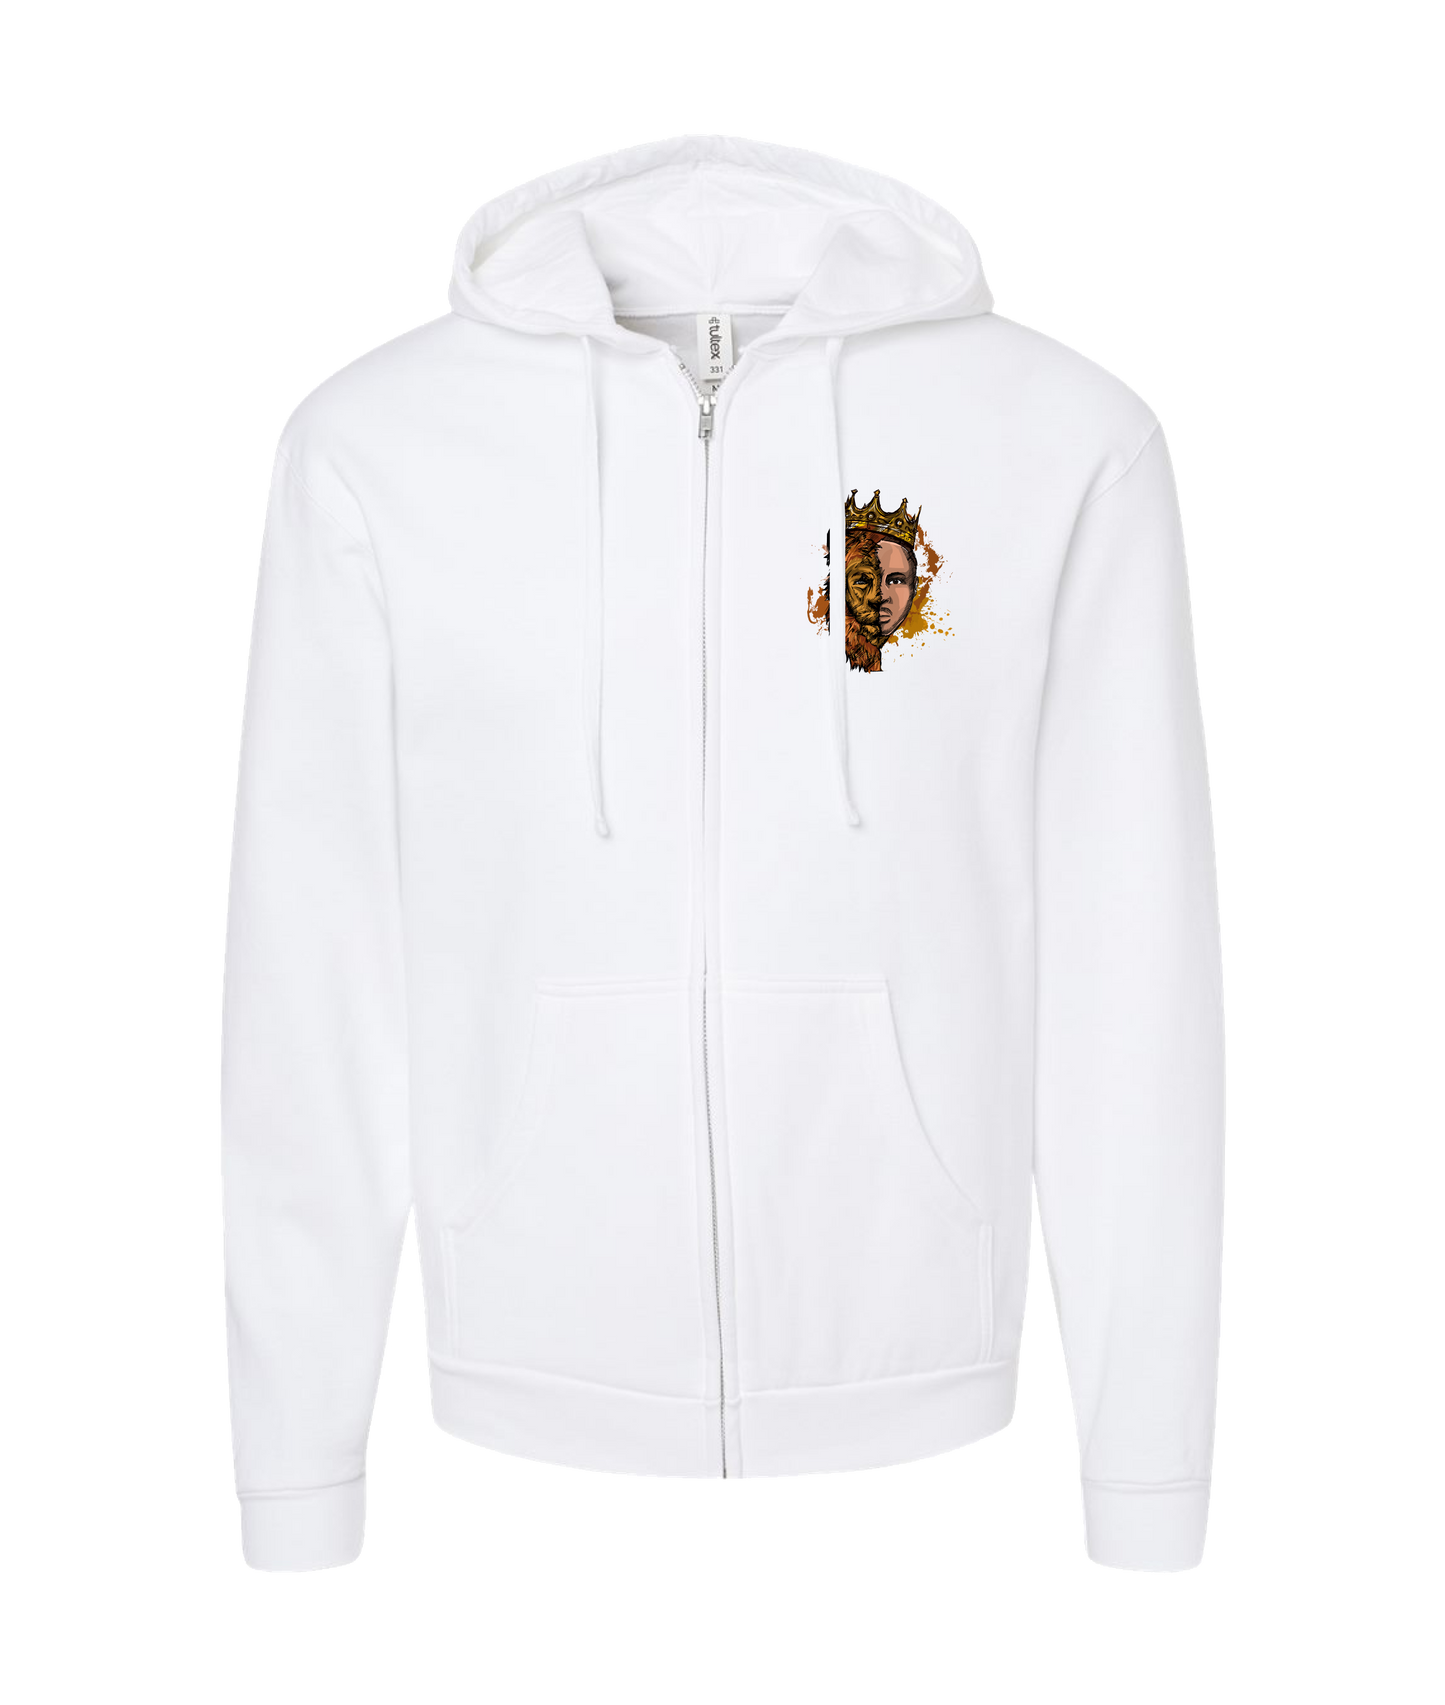 Rich Ruler - Pay Me In Gold - White Zip Up Hoodie